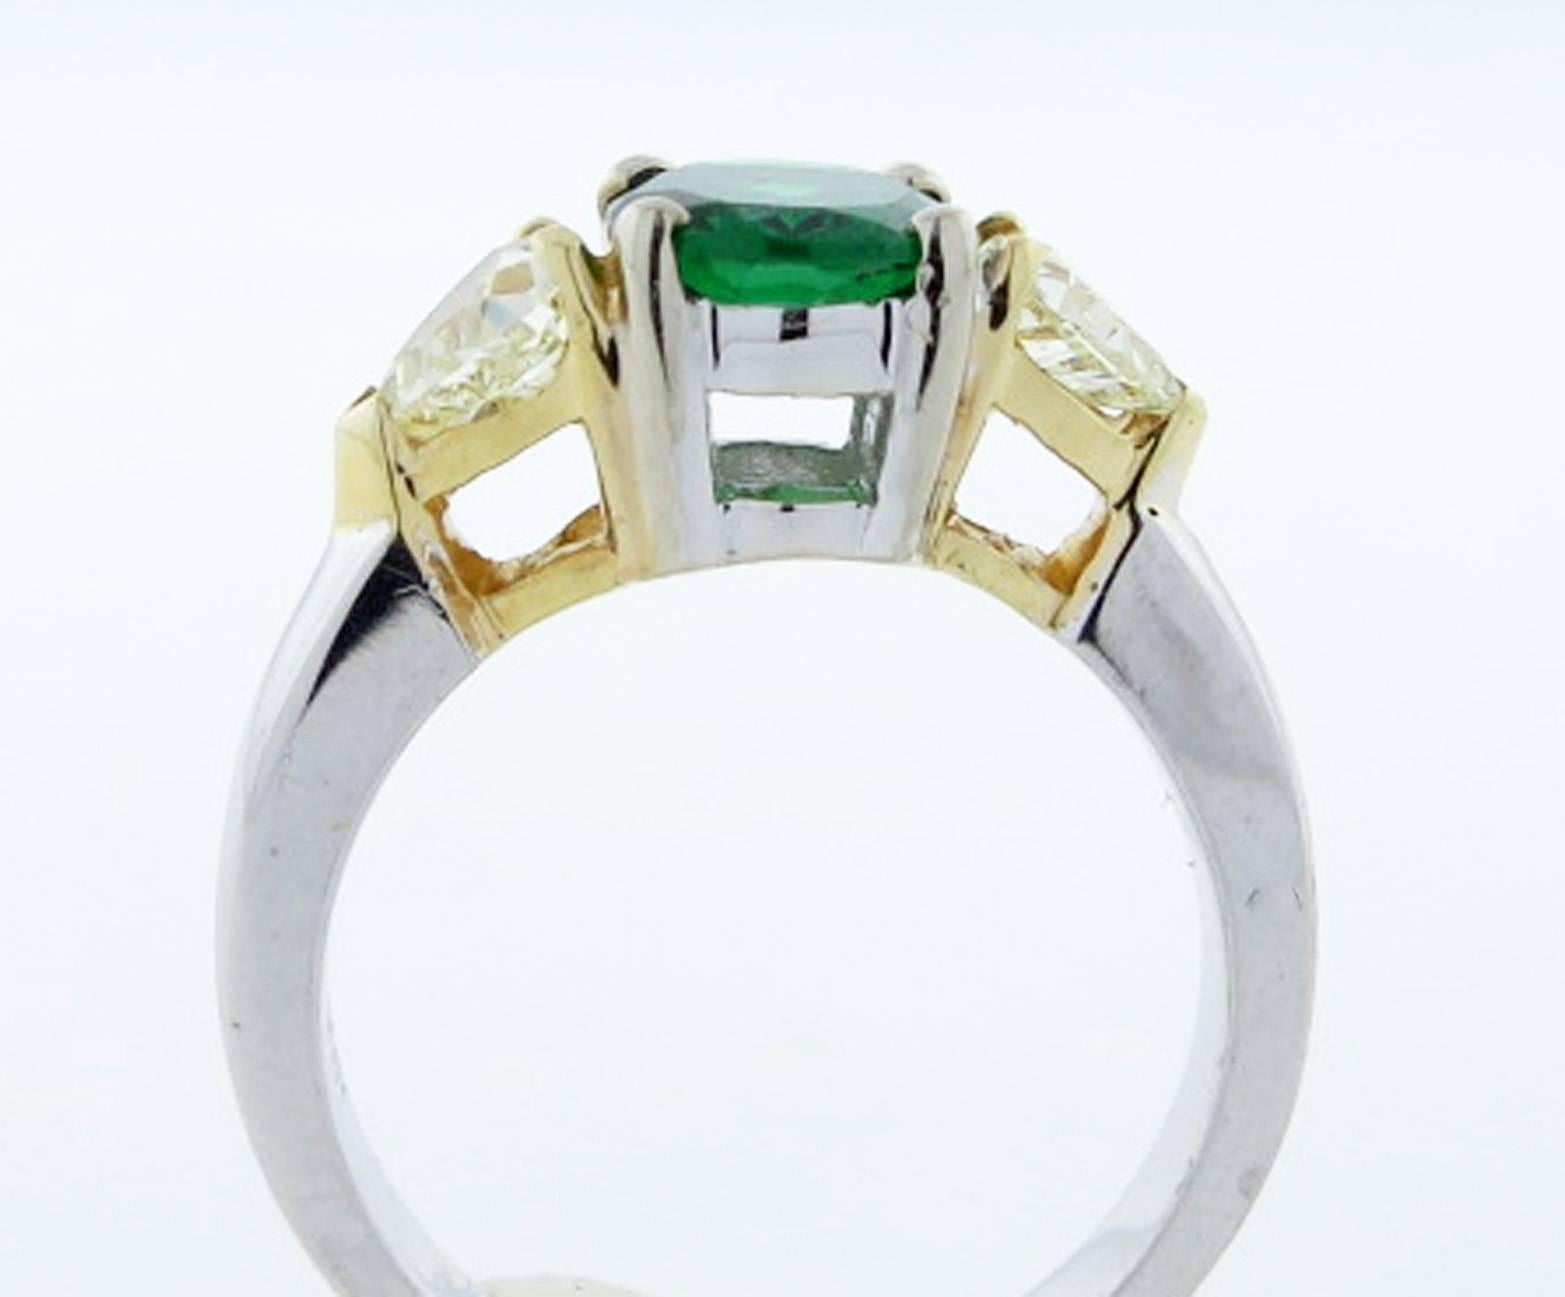 18kt. yellow and white gold Tsavorite garnet and diamond ring. The center is set with a faceted fine oval faceted green garnet (tsavorite) measuring 7.8mm. x 6.2mm. weighing approx 1.2 cts. Each side is set with a heart shape fancy yellow diamond